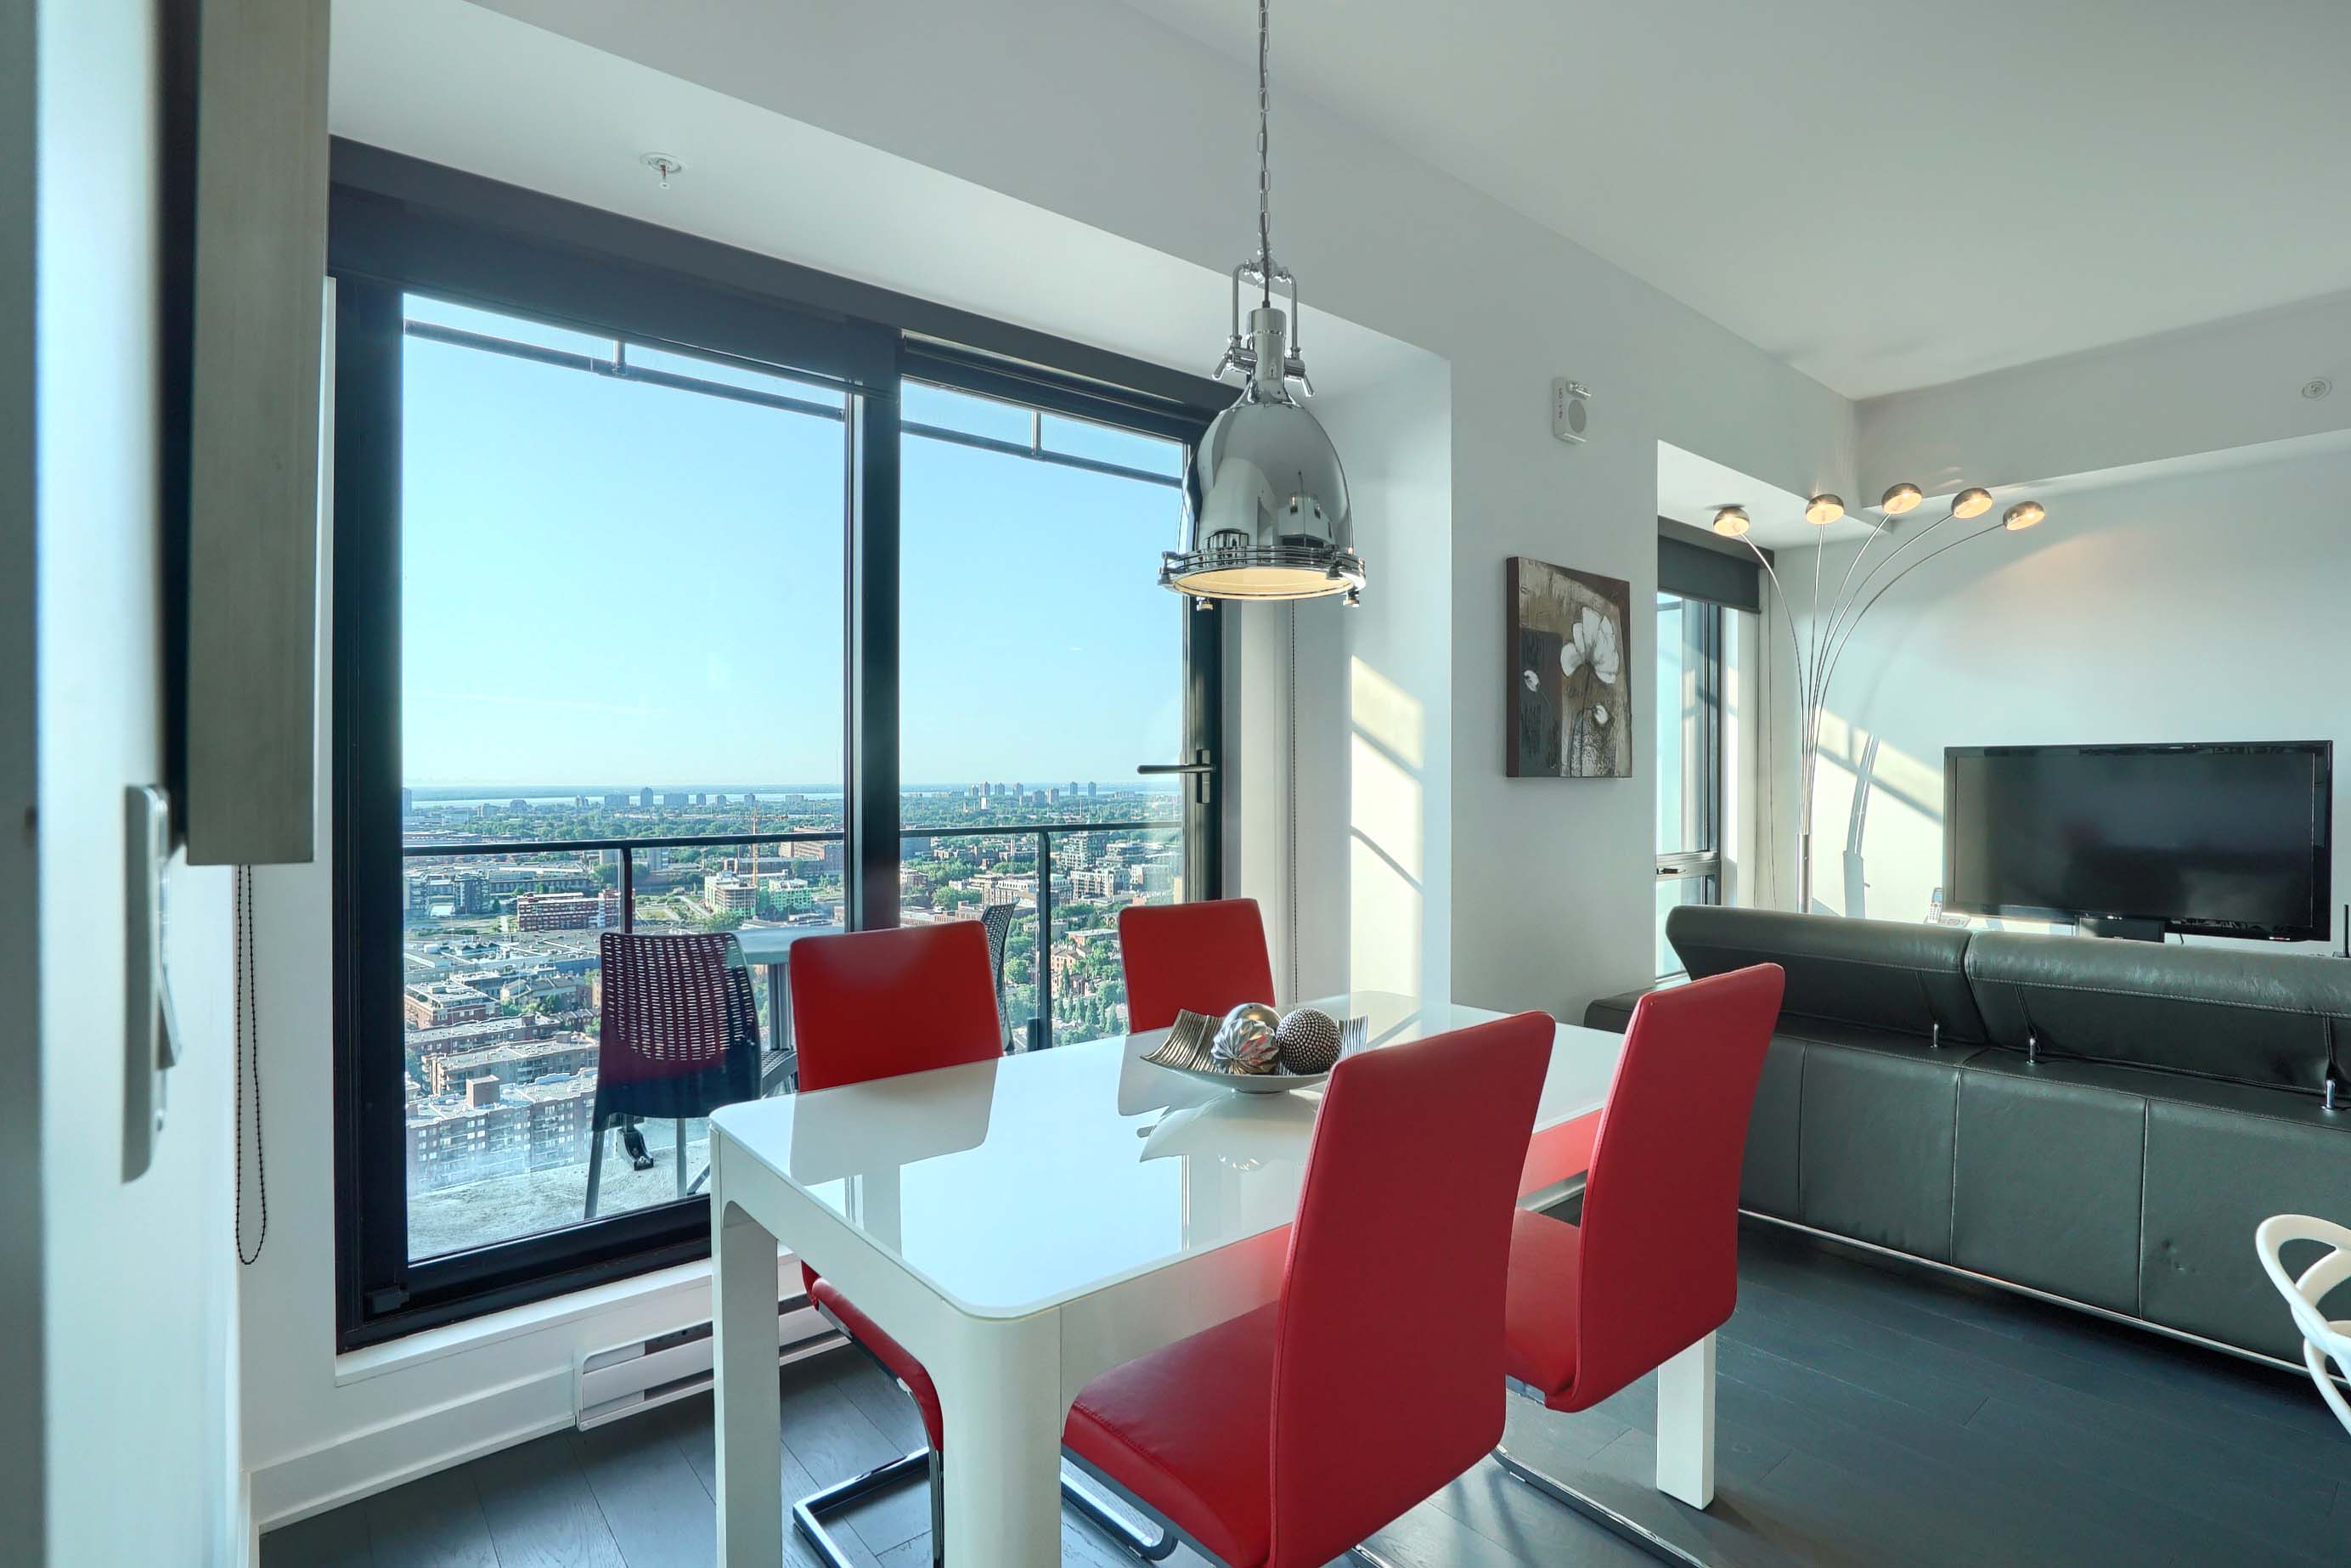 View of the dining table with seating for four, the balcony area and into the living area of this furnished short term rental in montreal